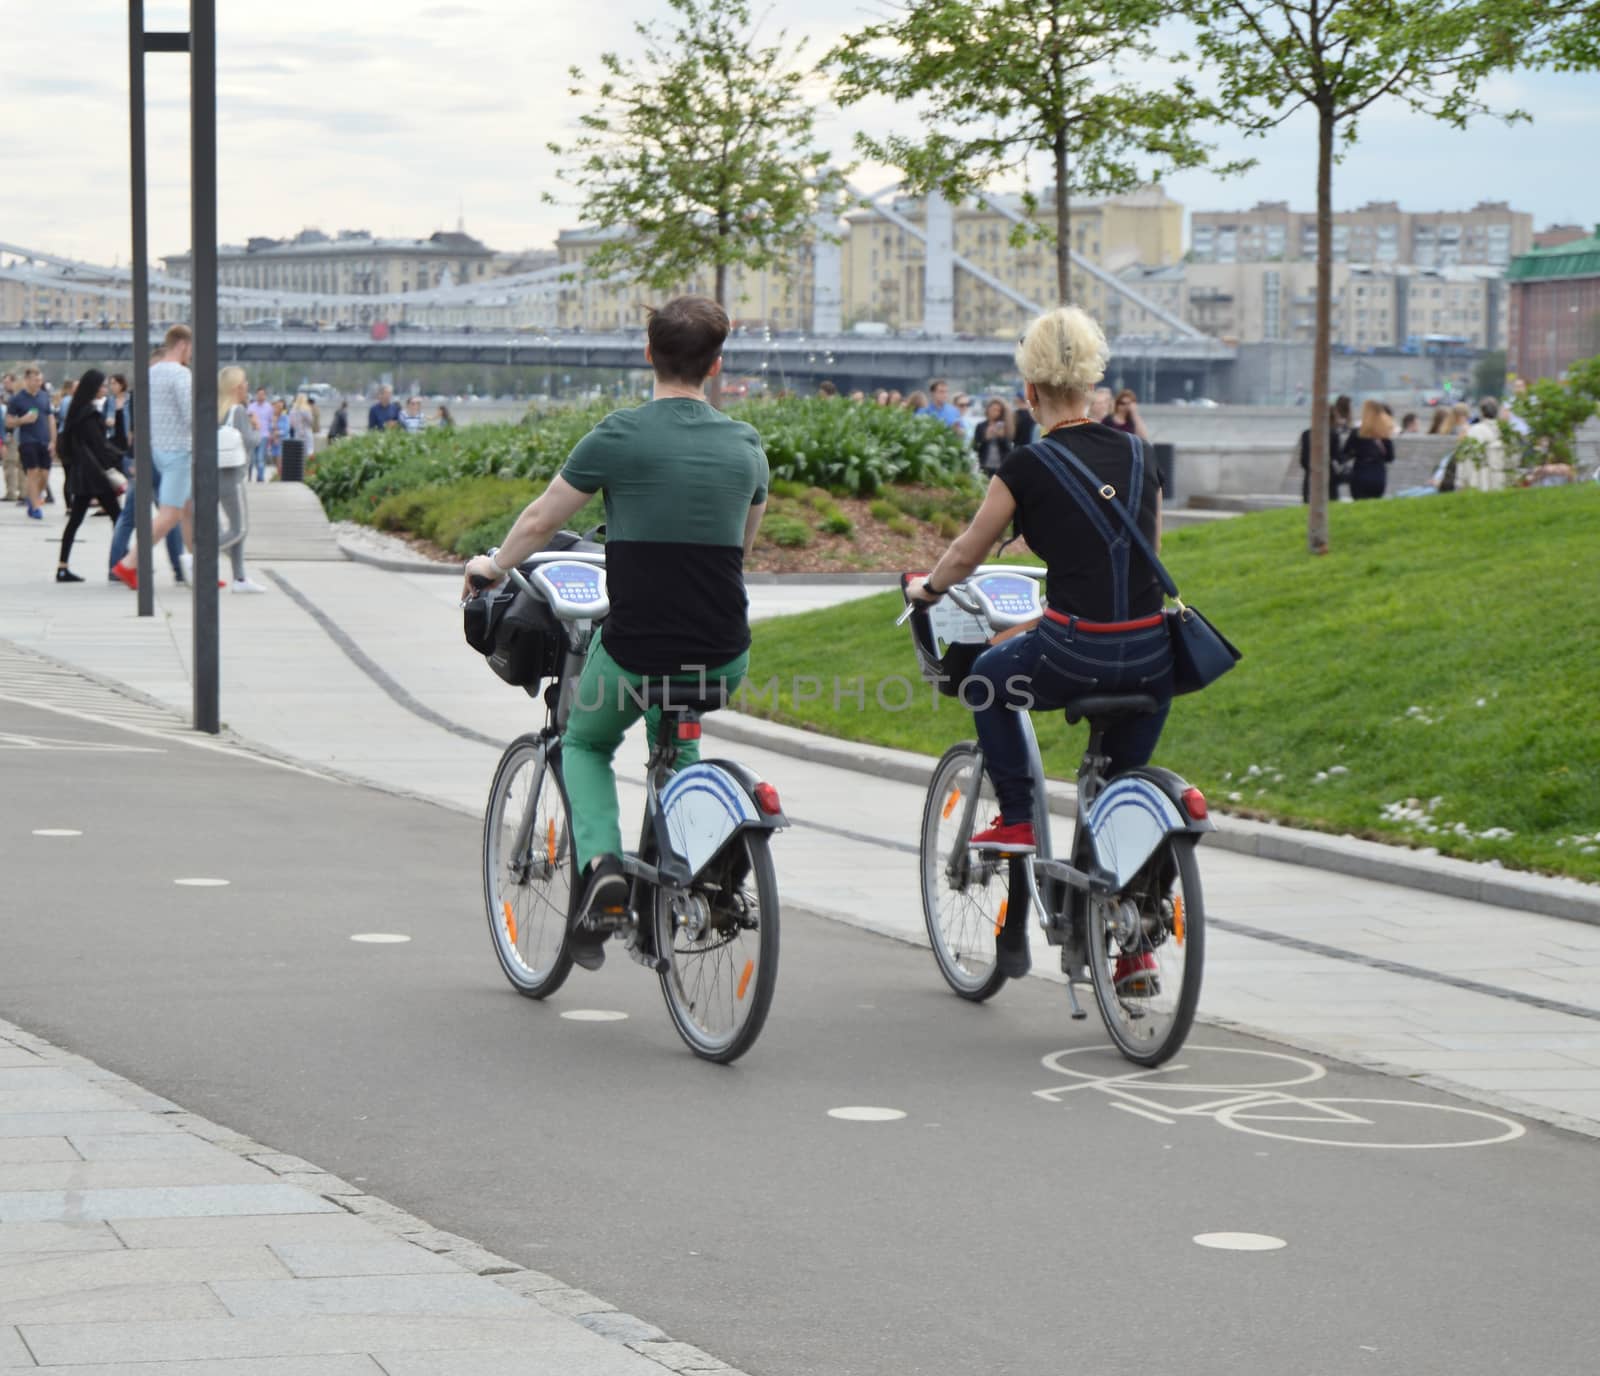 A man and a woman rented bikes for chatting and Cycling in the city.